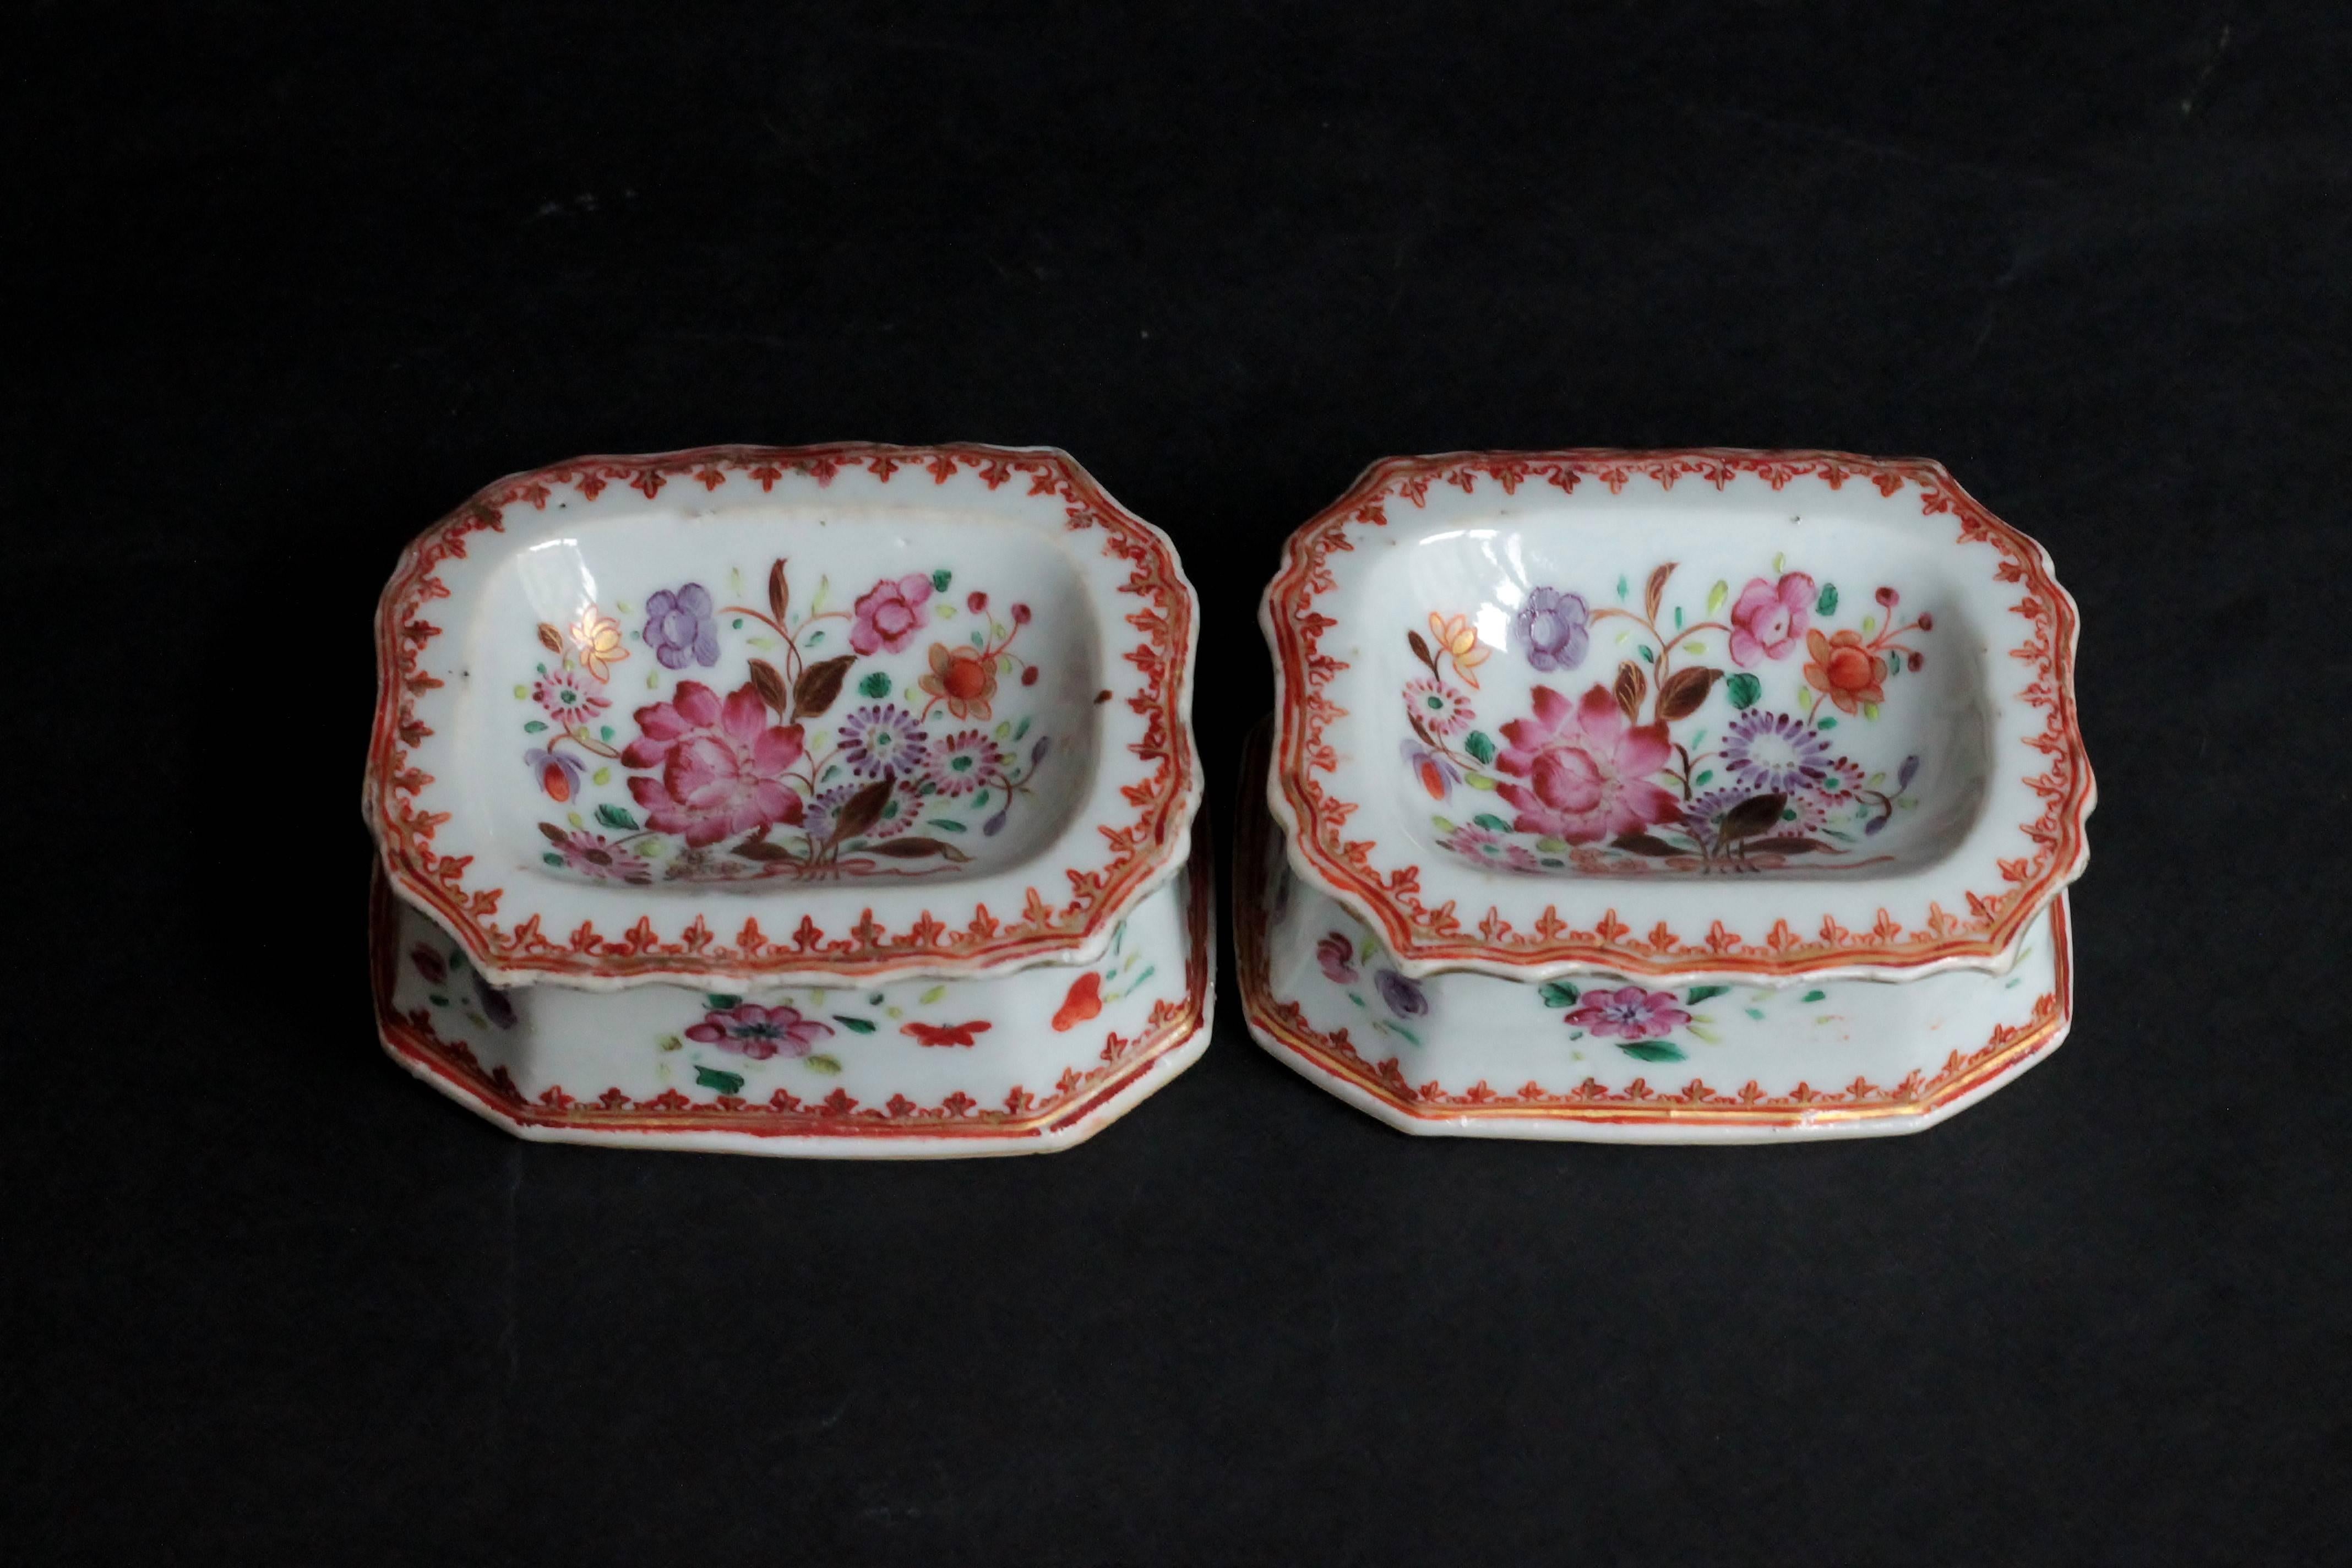 A pair of rectangular salts in porcelain of China with enamels of famille rose and gold.
Decorated with flowers in the centre and on the side. Iron spikes in gold on the rim.
Qianlong period (1736-1795). 18th century.
Measures: Height 3.5 cm,